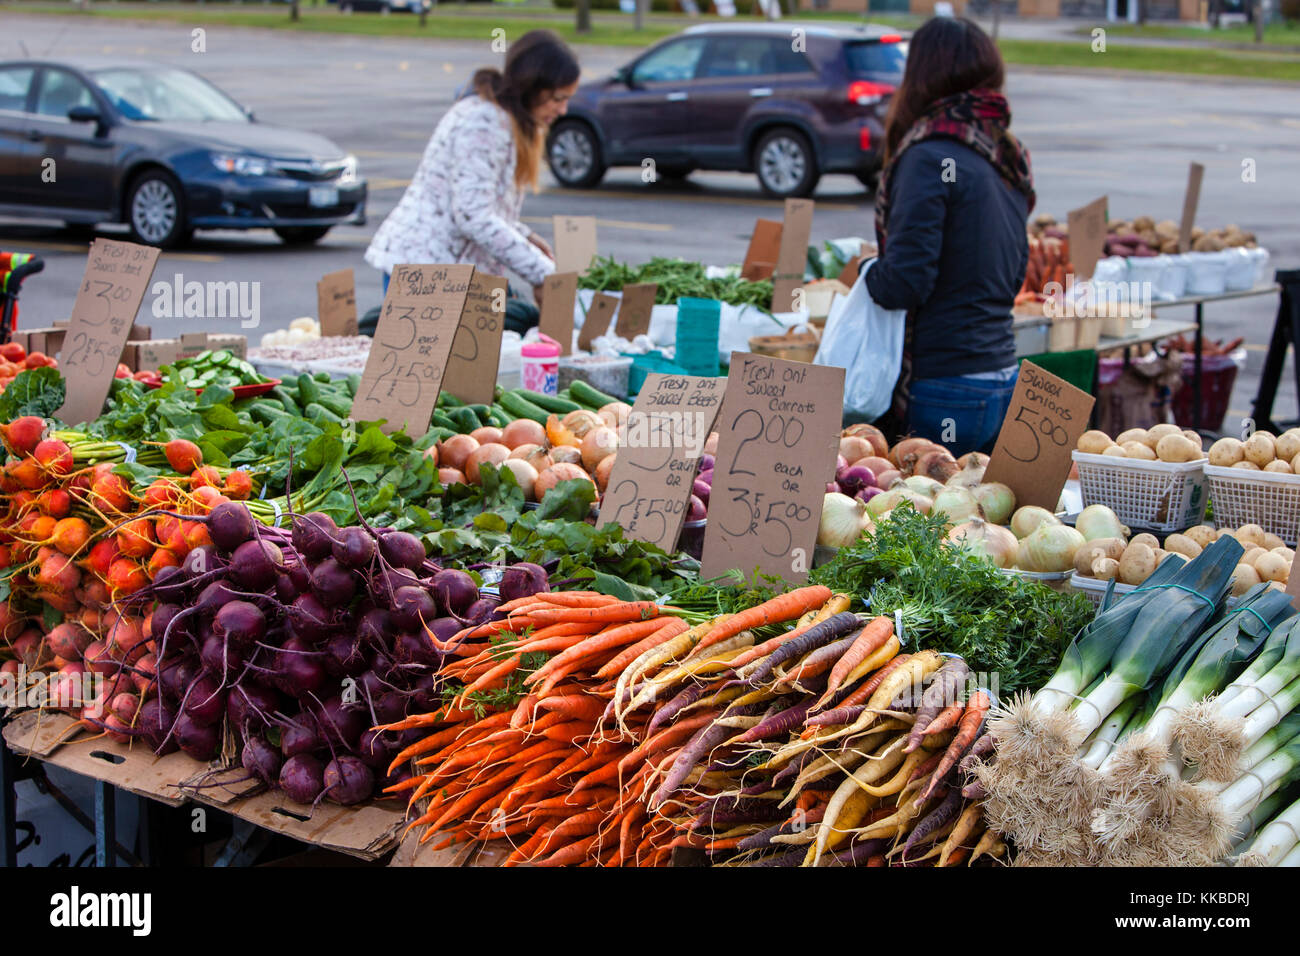 Farmers Market showing fresh produce for sale. Stock Photo